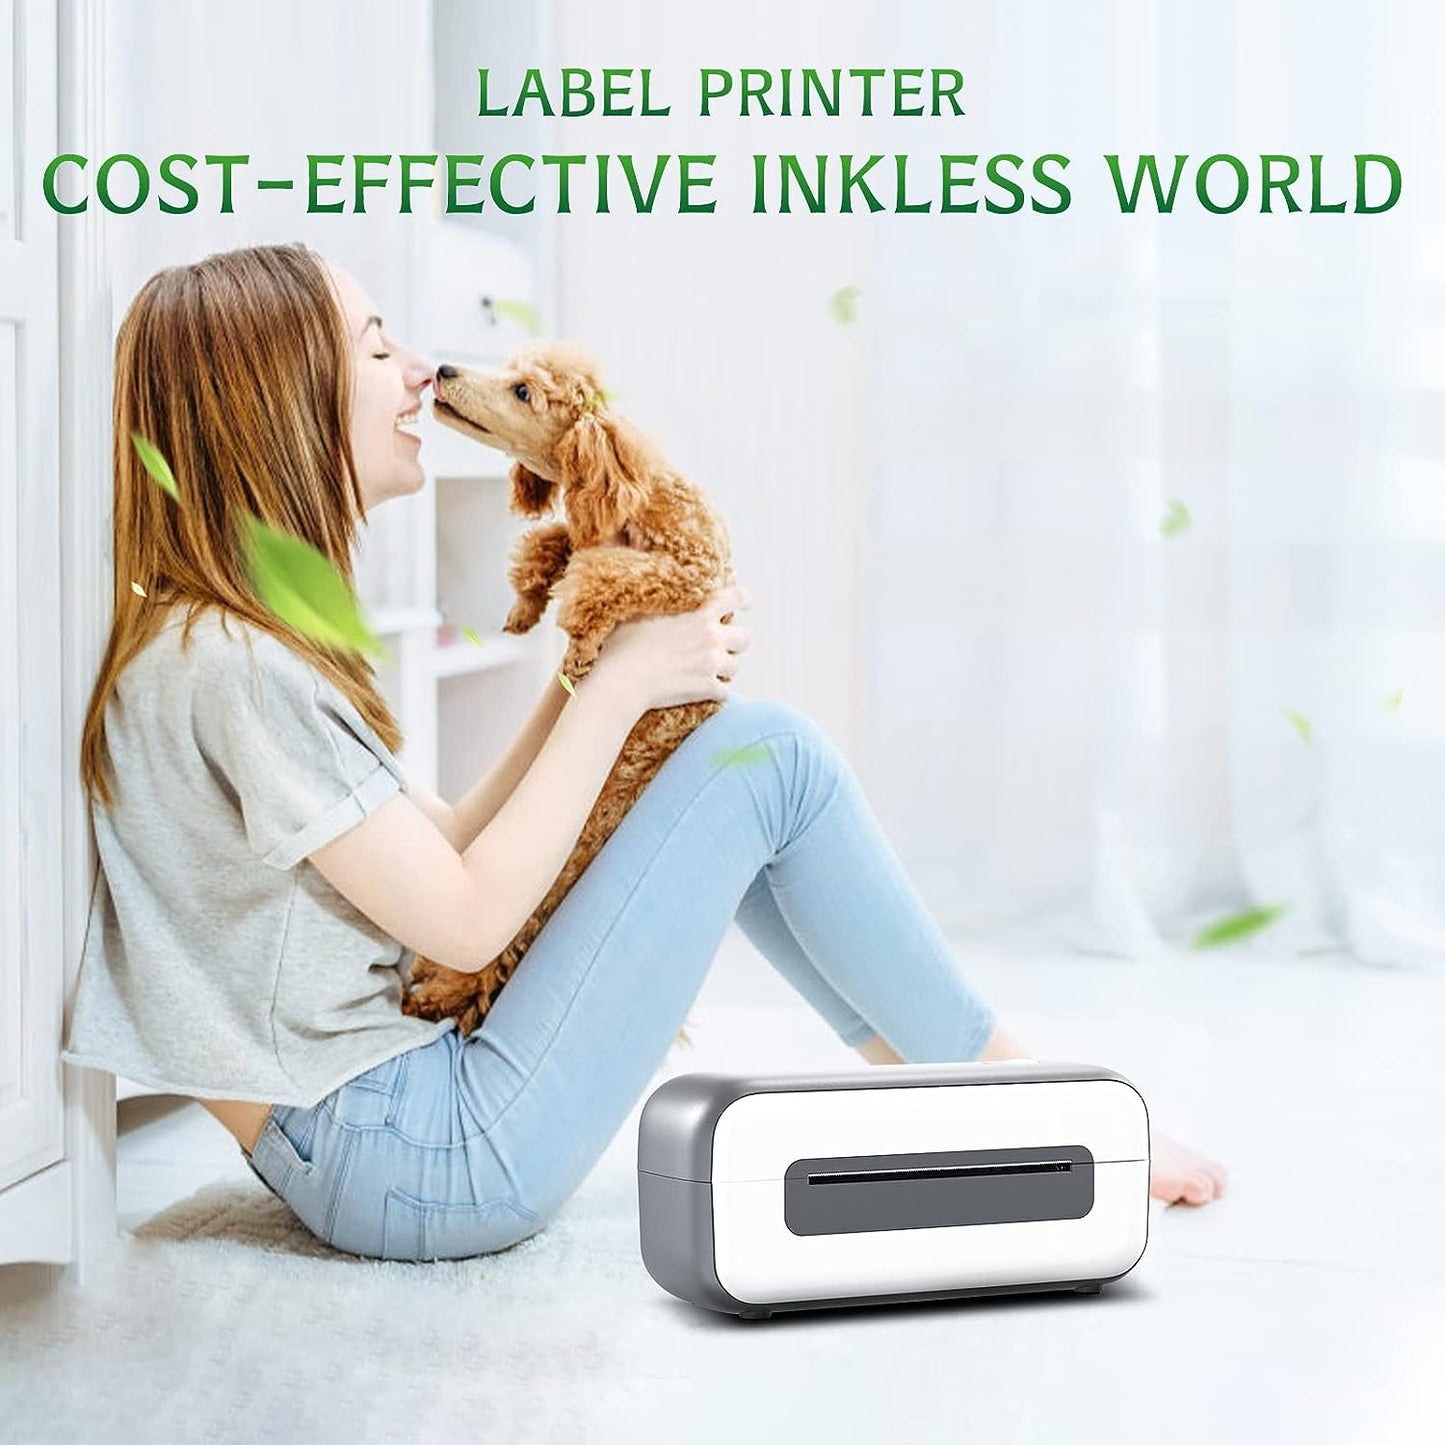 POWERFUL Phomemo Thermal Label Printer, Shipping Label Printer, Desktop Label Printer for Mac Windows Chromebook, Thermal Printer Compatible with Amazon, Ebay, Shopify, Etsy, UPS, FedEx, DHL